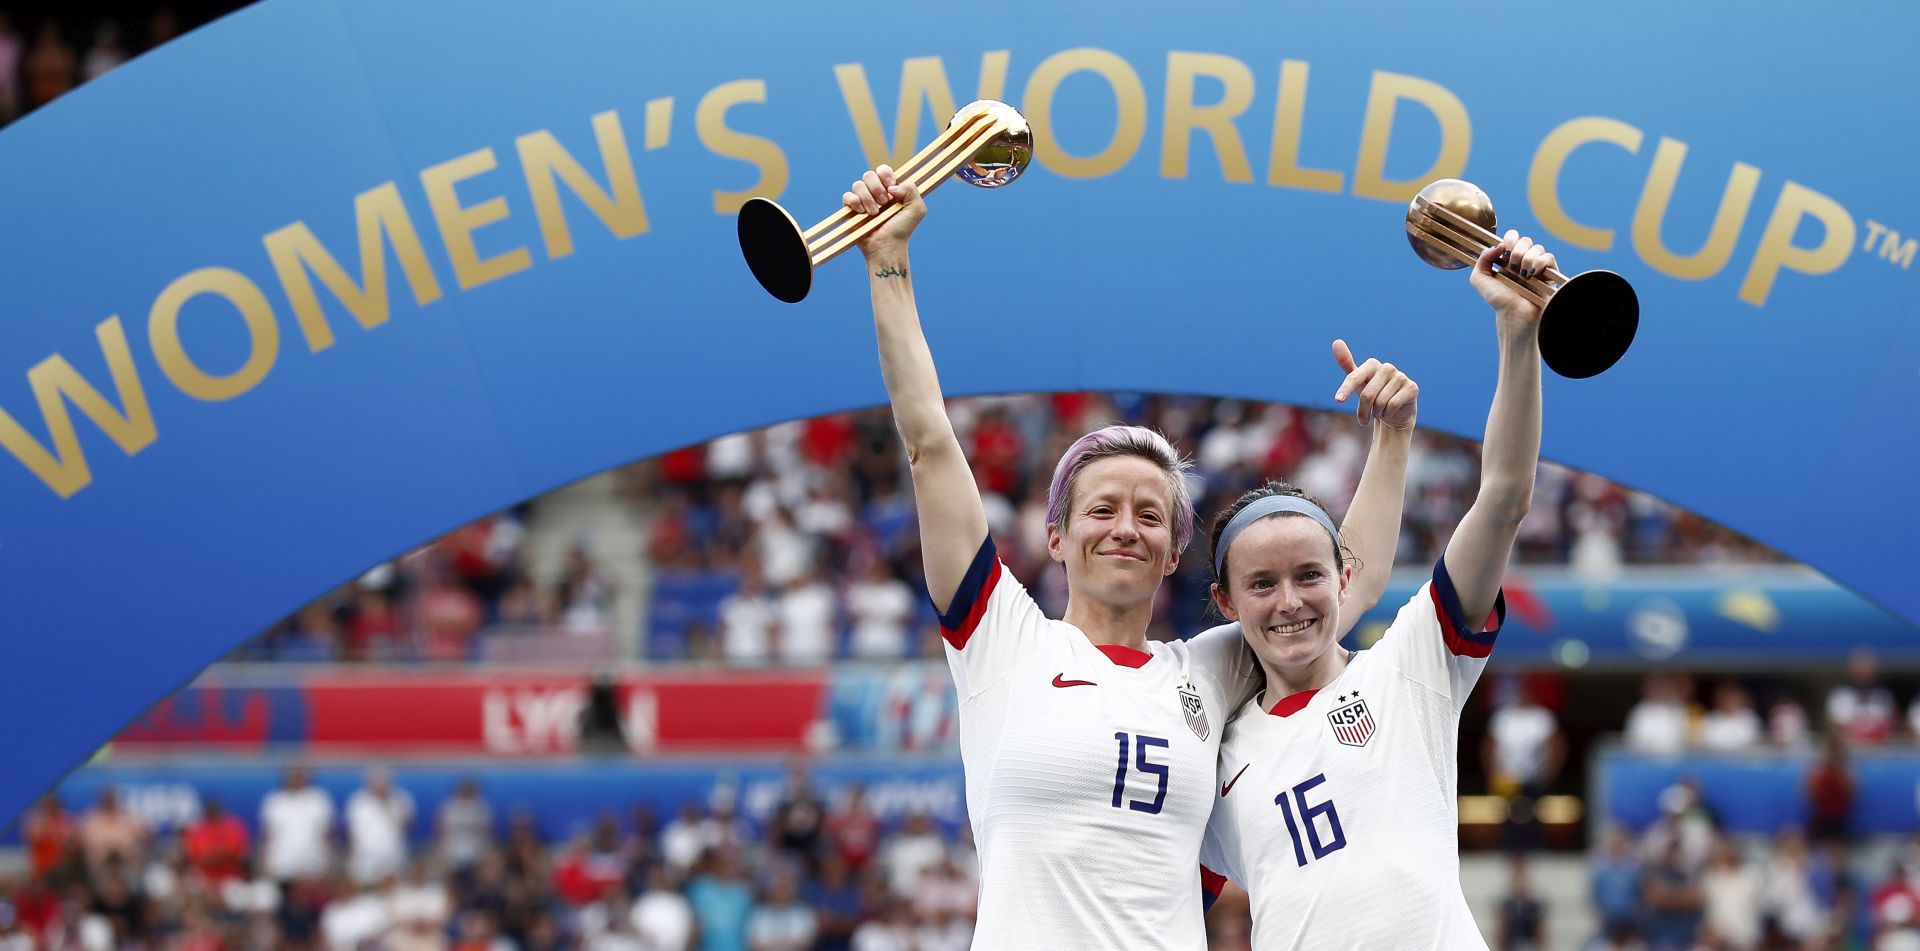 epa07701822 USA's Megan Rapinoe (L) and USA's Rose Lavelle (R) pose with the  trophy after the FIFA Women's World Cup 2019 final soccer match between USA and Netherlands in Lyon, France, 07 July 2019.  EPA/IAN LANGSDON